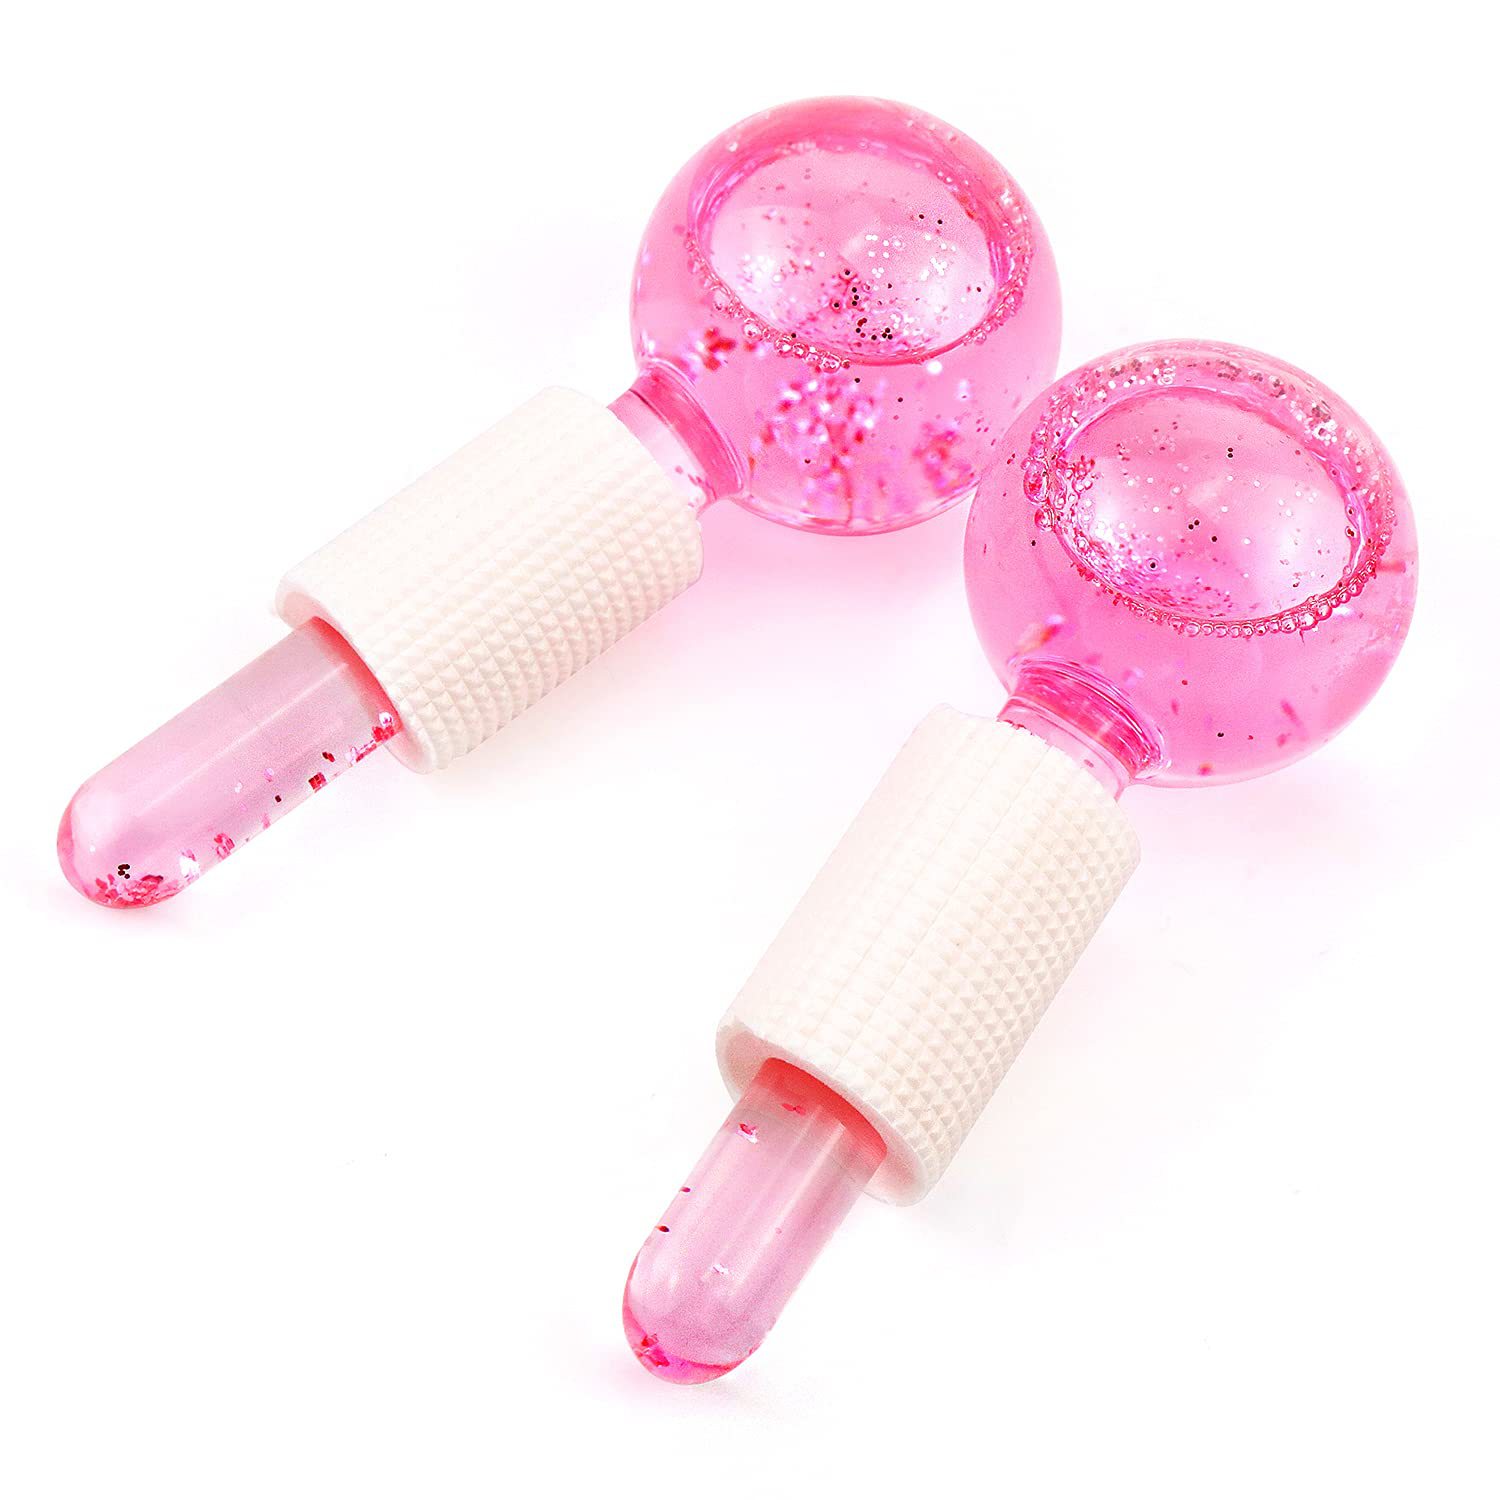 Glitter Ball Pink Beauty Tool Facial Cooling Eye Body Skin Care Lift Glass For Ice Globes Ice Roller Face Massager插图